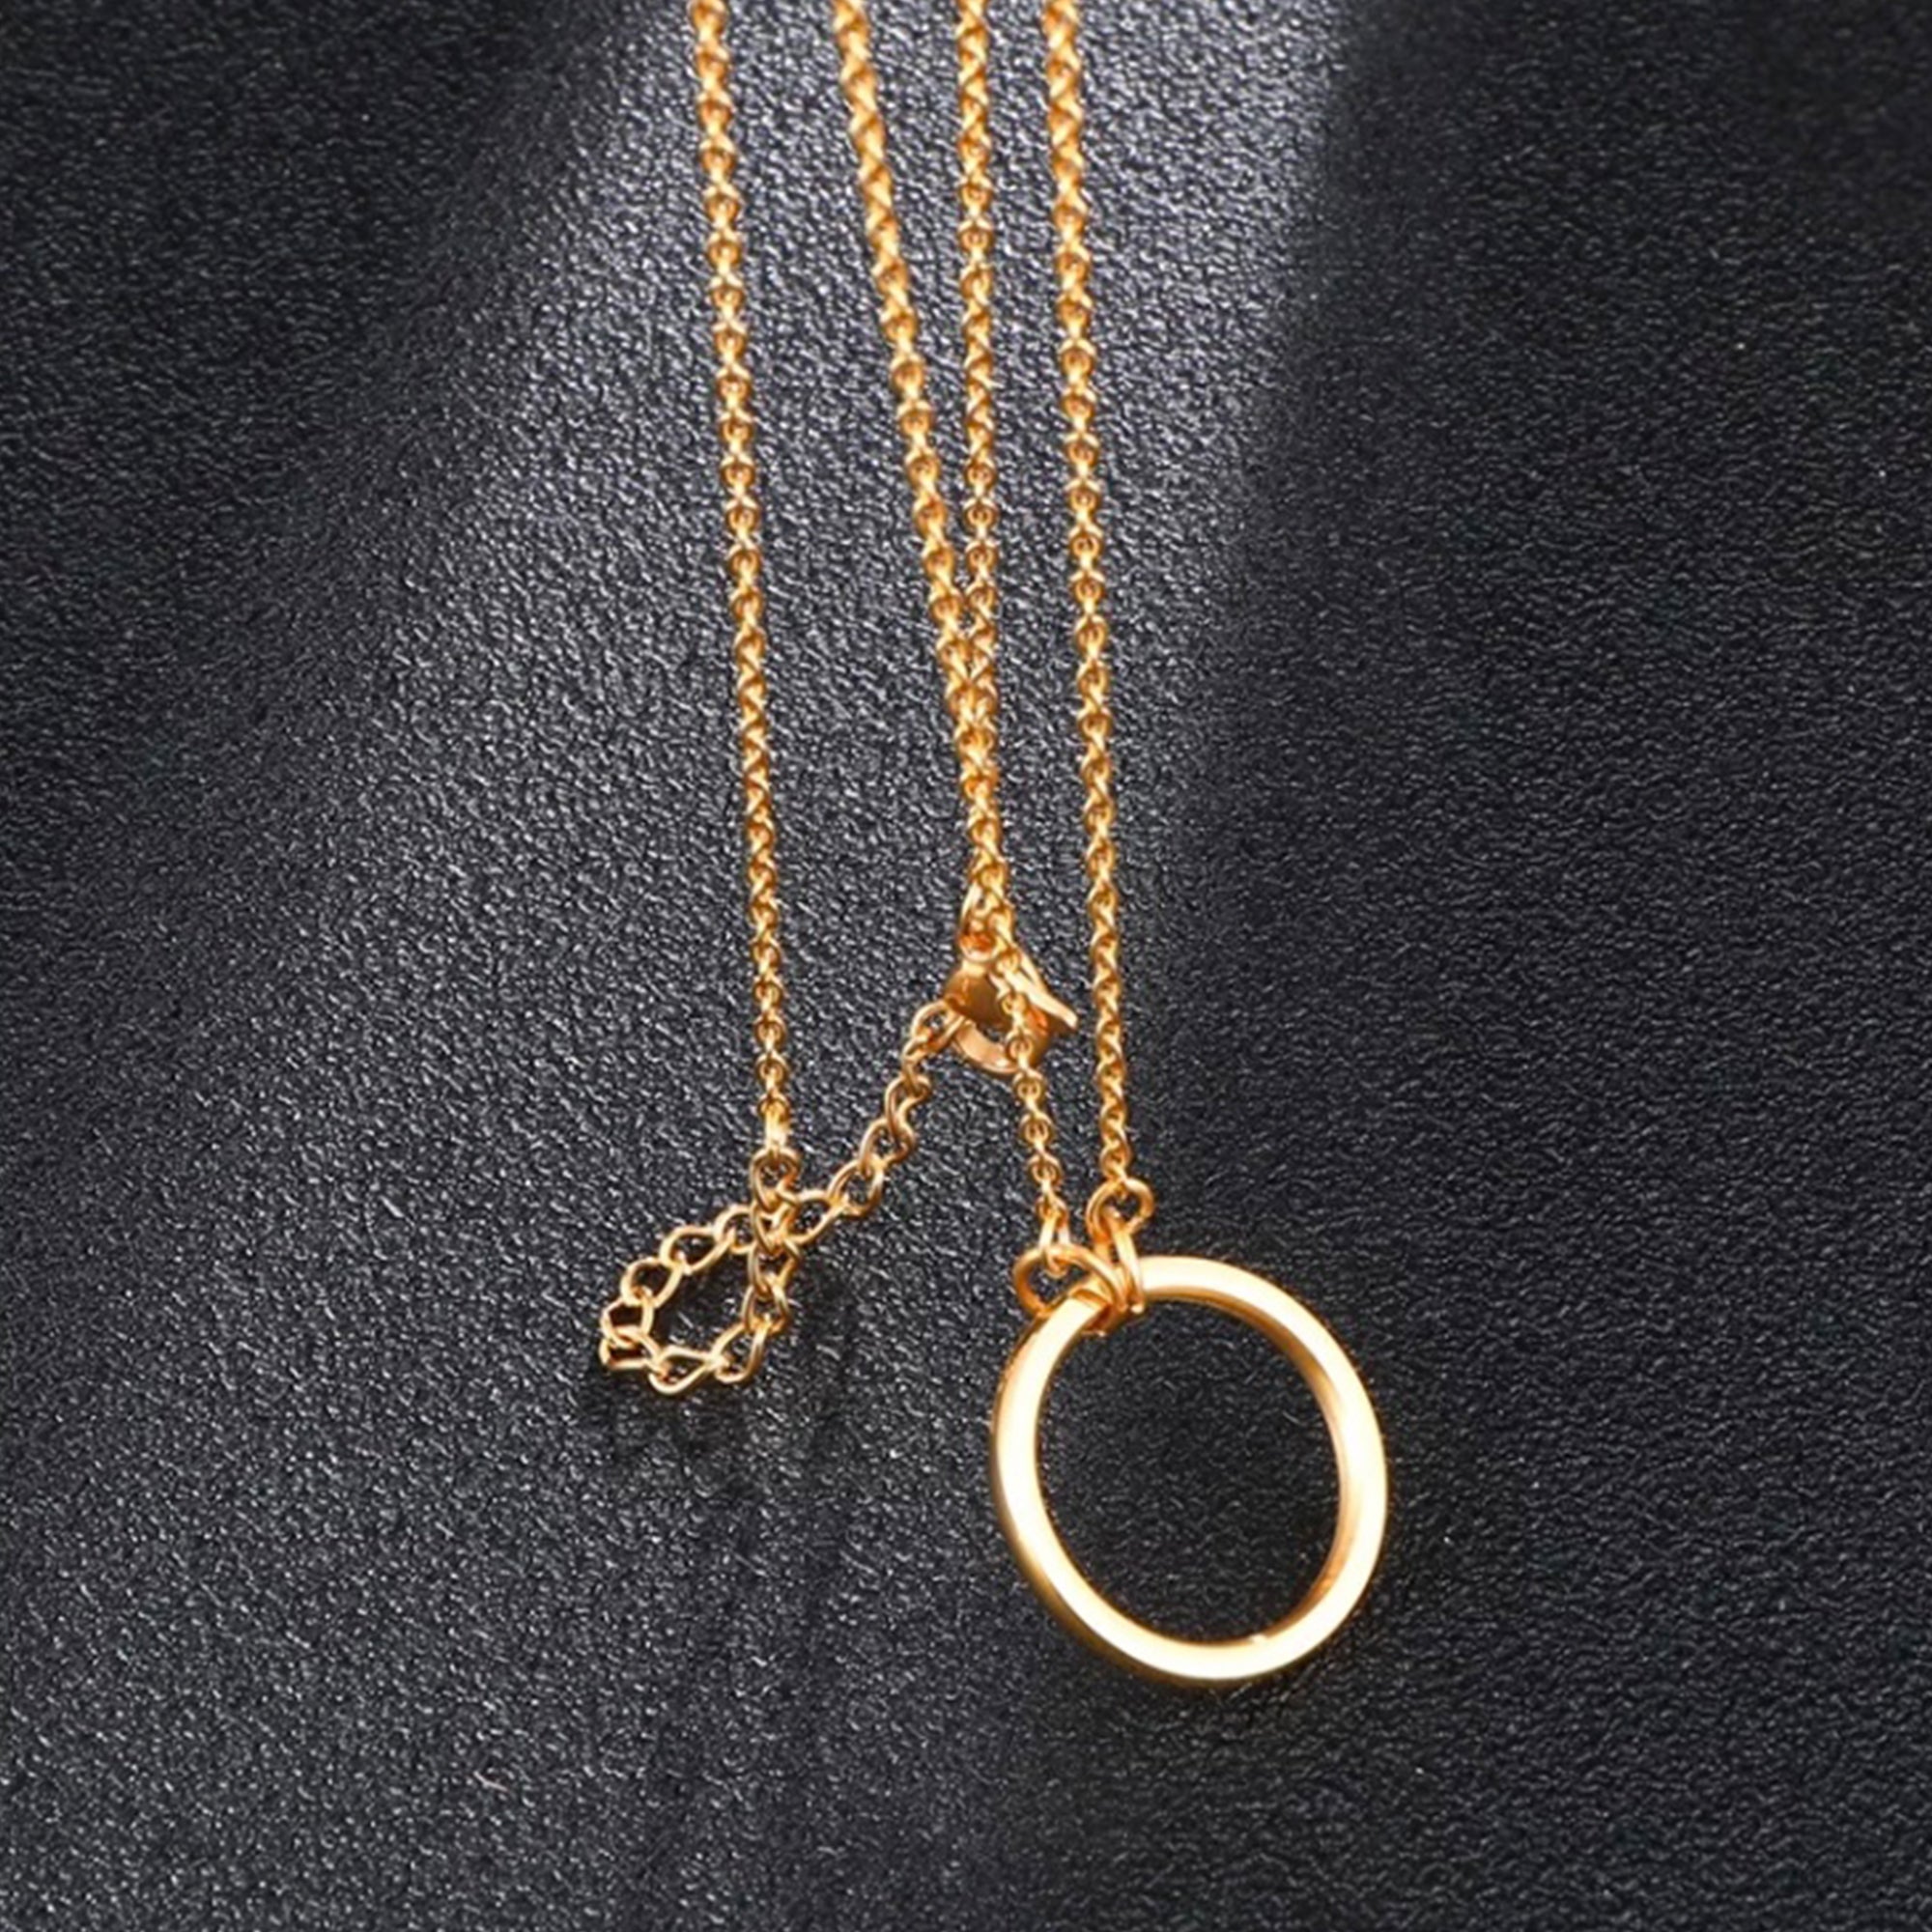 Malticolour alloy Double Circle Neclace, Jewellery Type: Ring Pendant at Rs  40 in Greater Noida